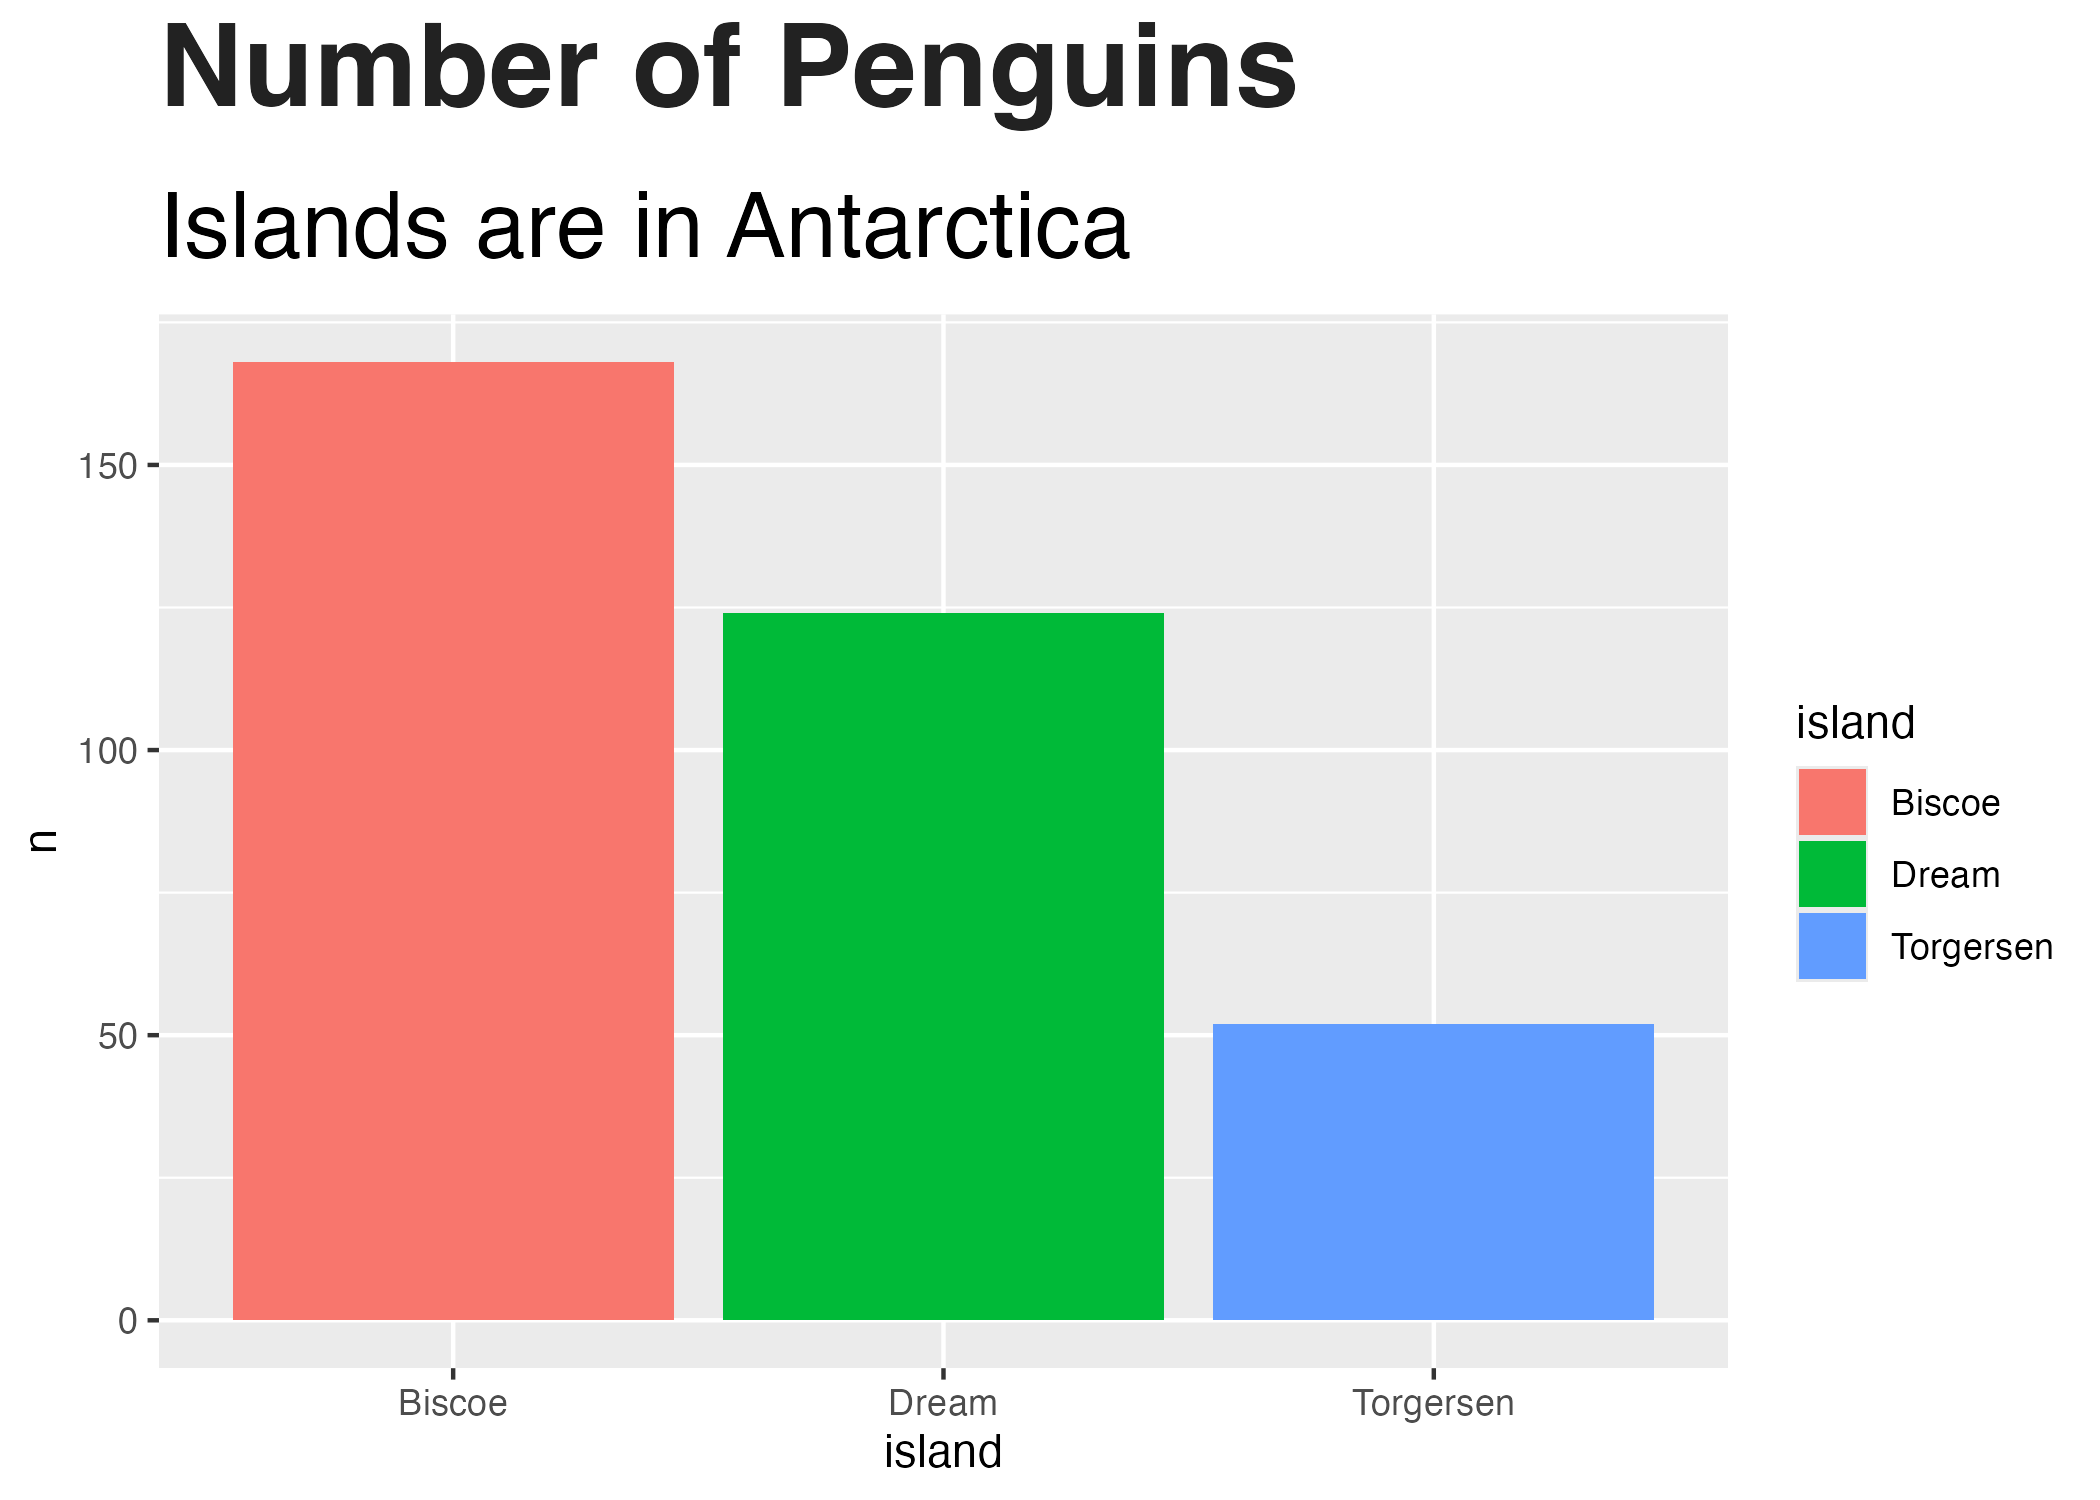 The penguin chart with only the text formatting changed